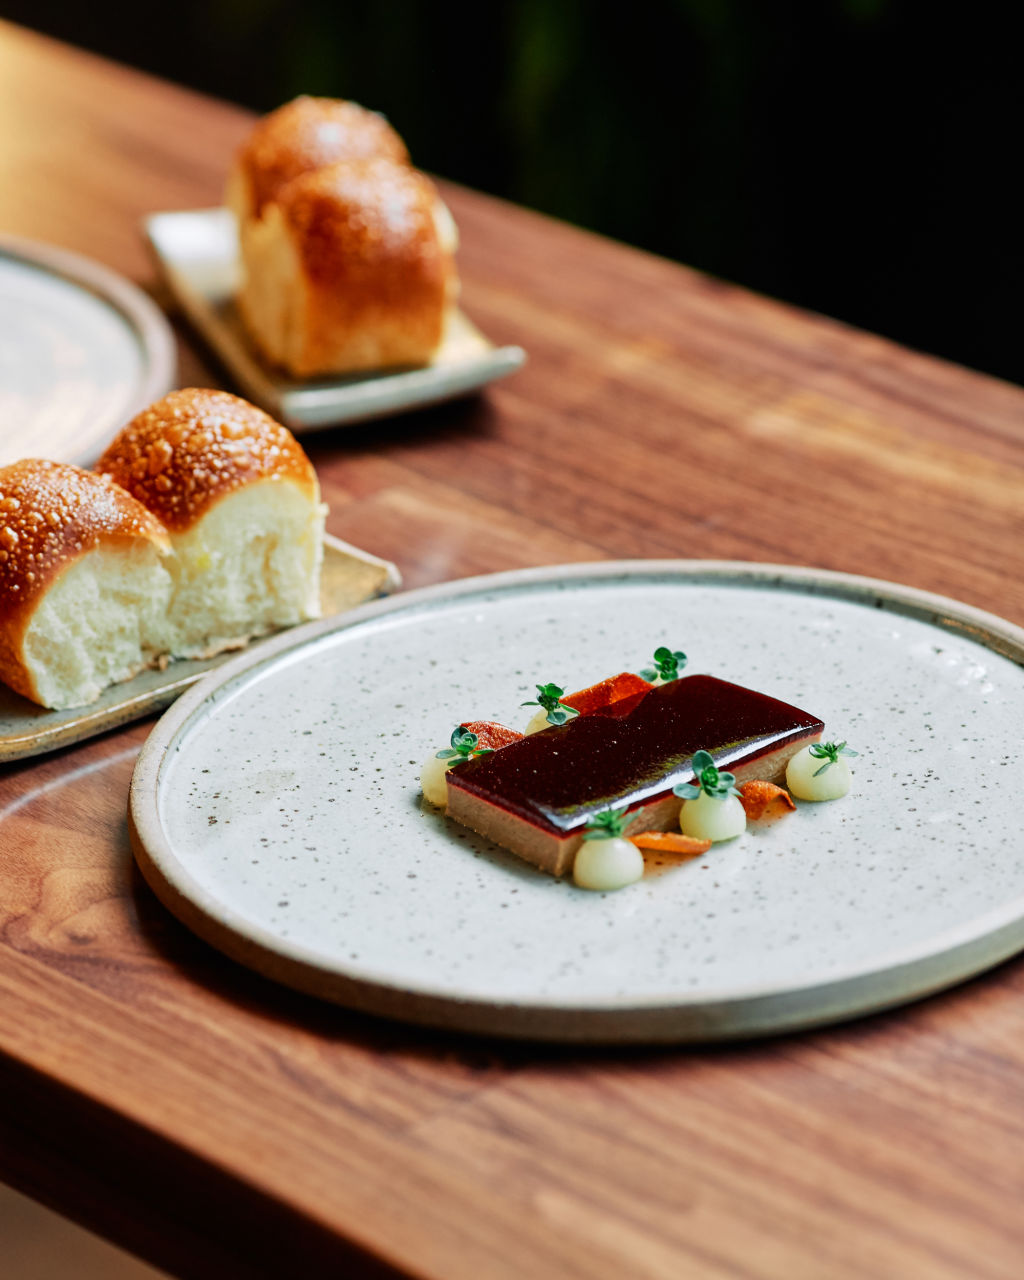 Chicken liver parfait with ruby port glaze comes with shiny milk buns. Photo: Harvard Wang.